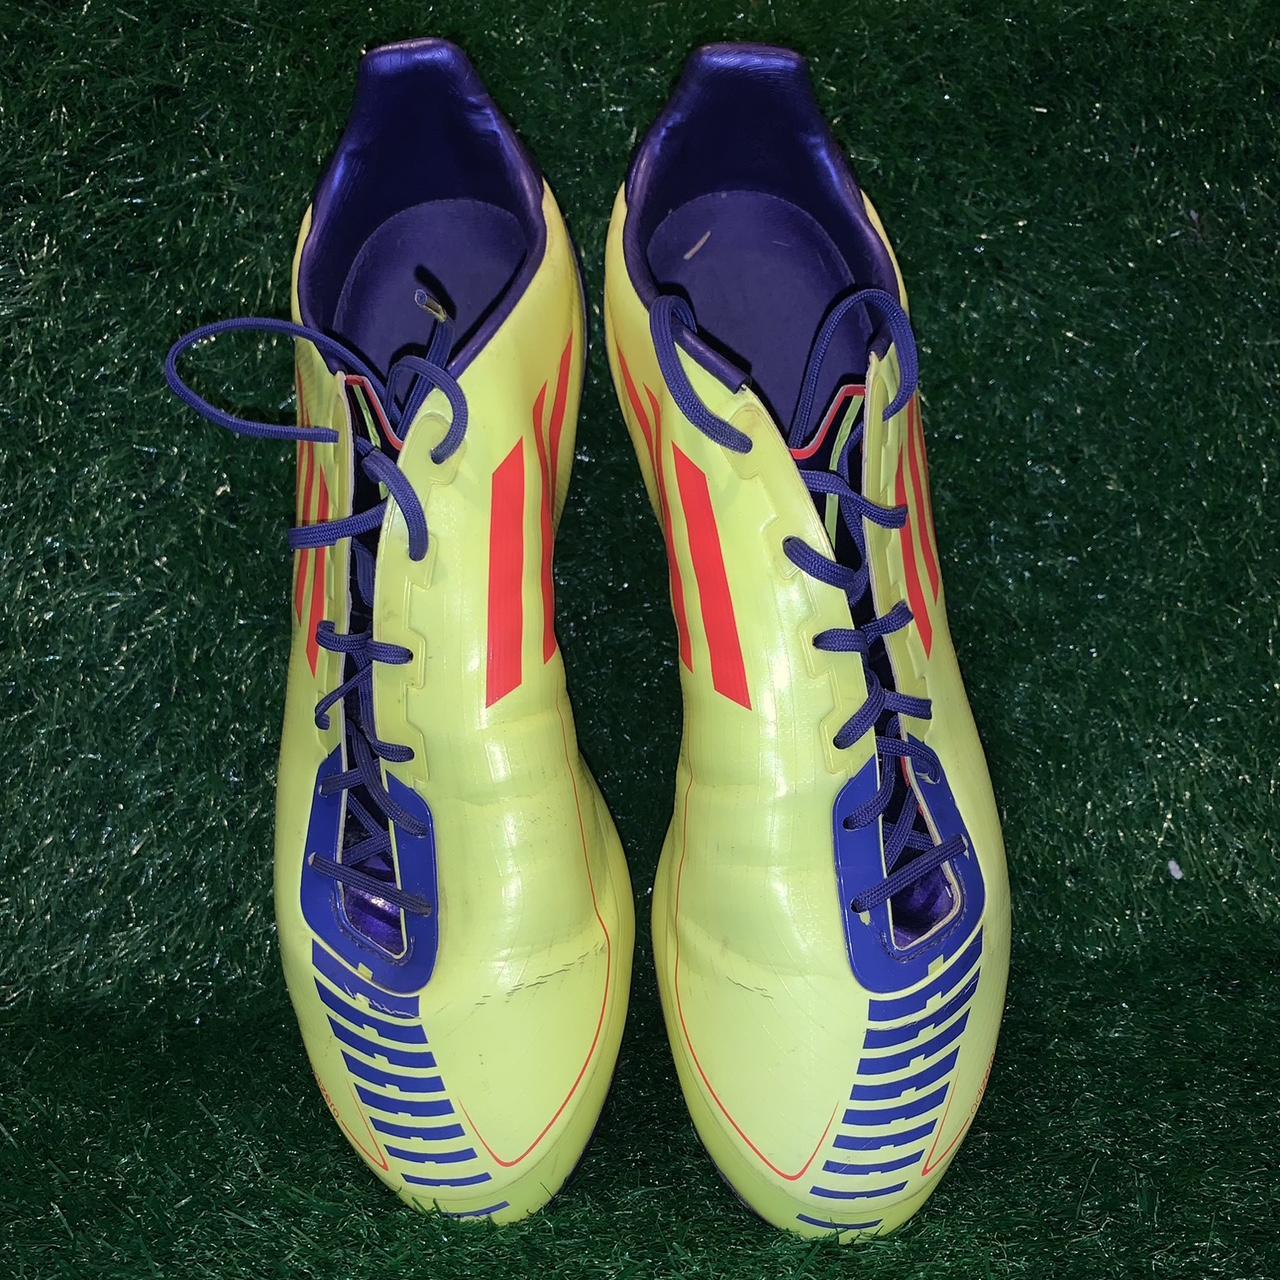 Adidas Men's Yellow and Purple Boots (2)